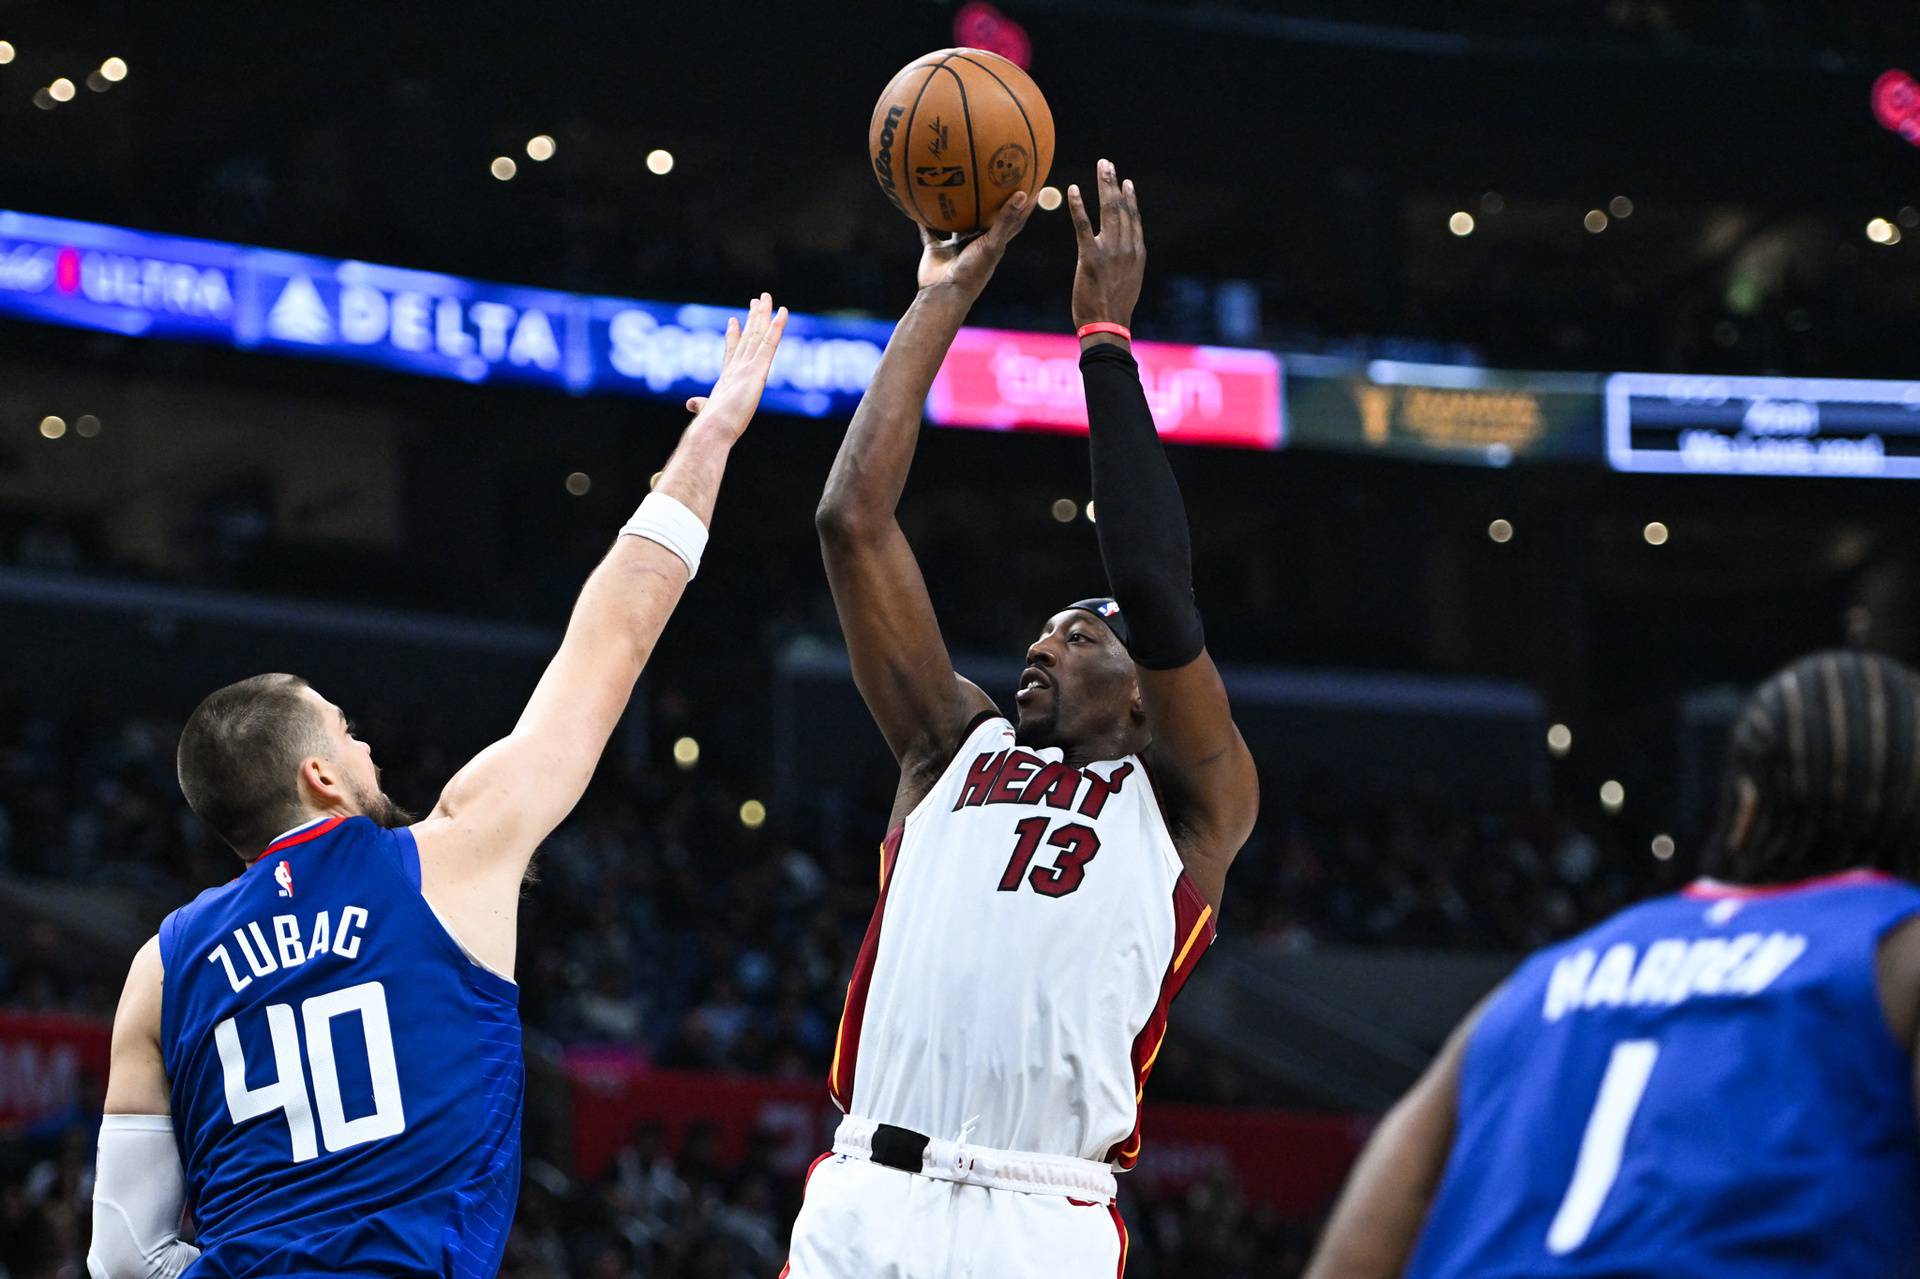 NBA: Miami Heat at Los Angeles Clippers